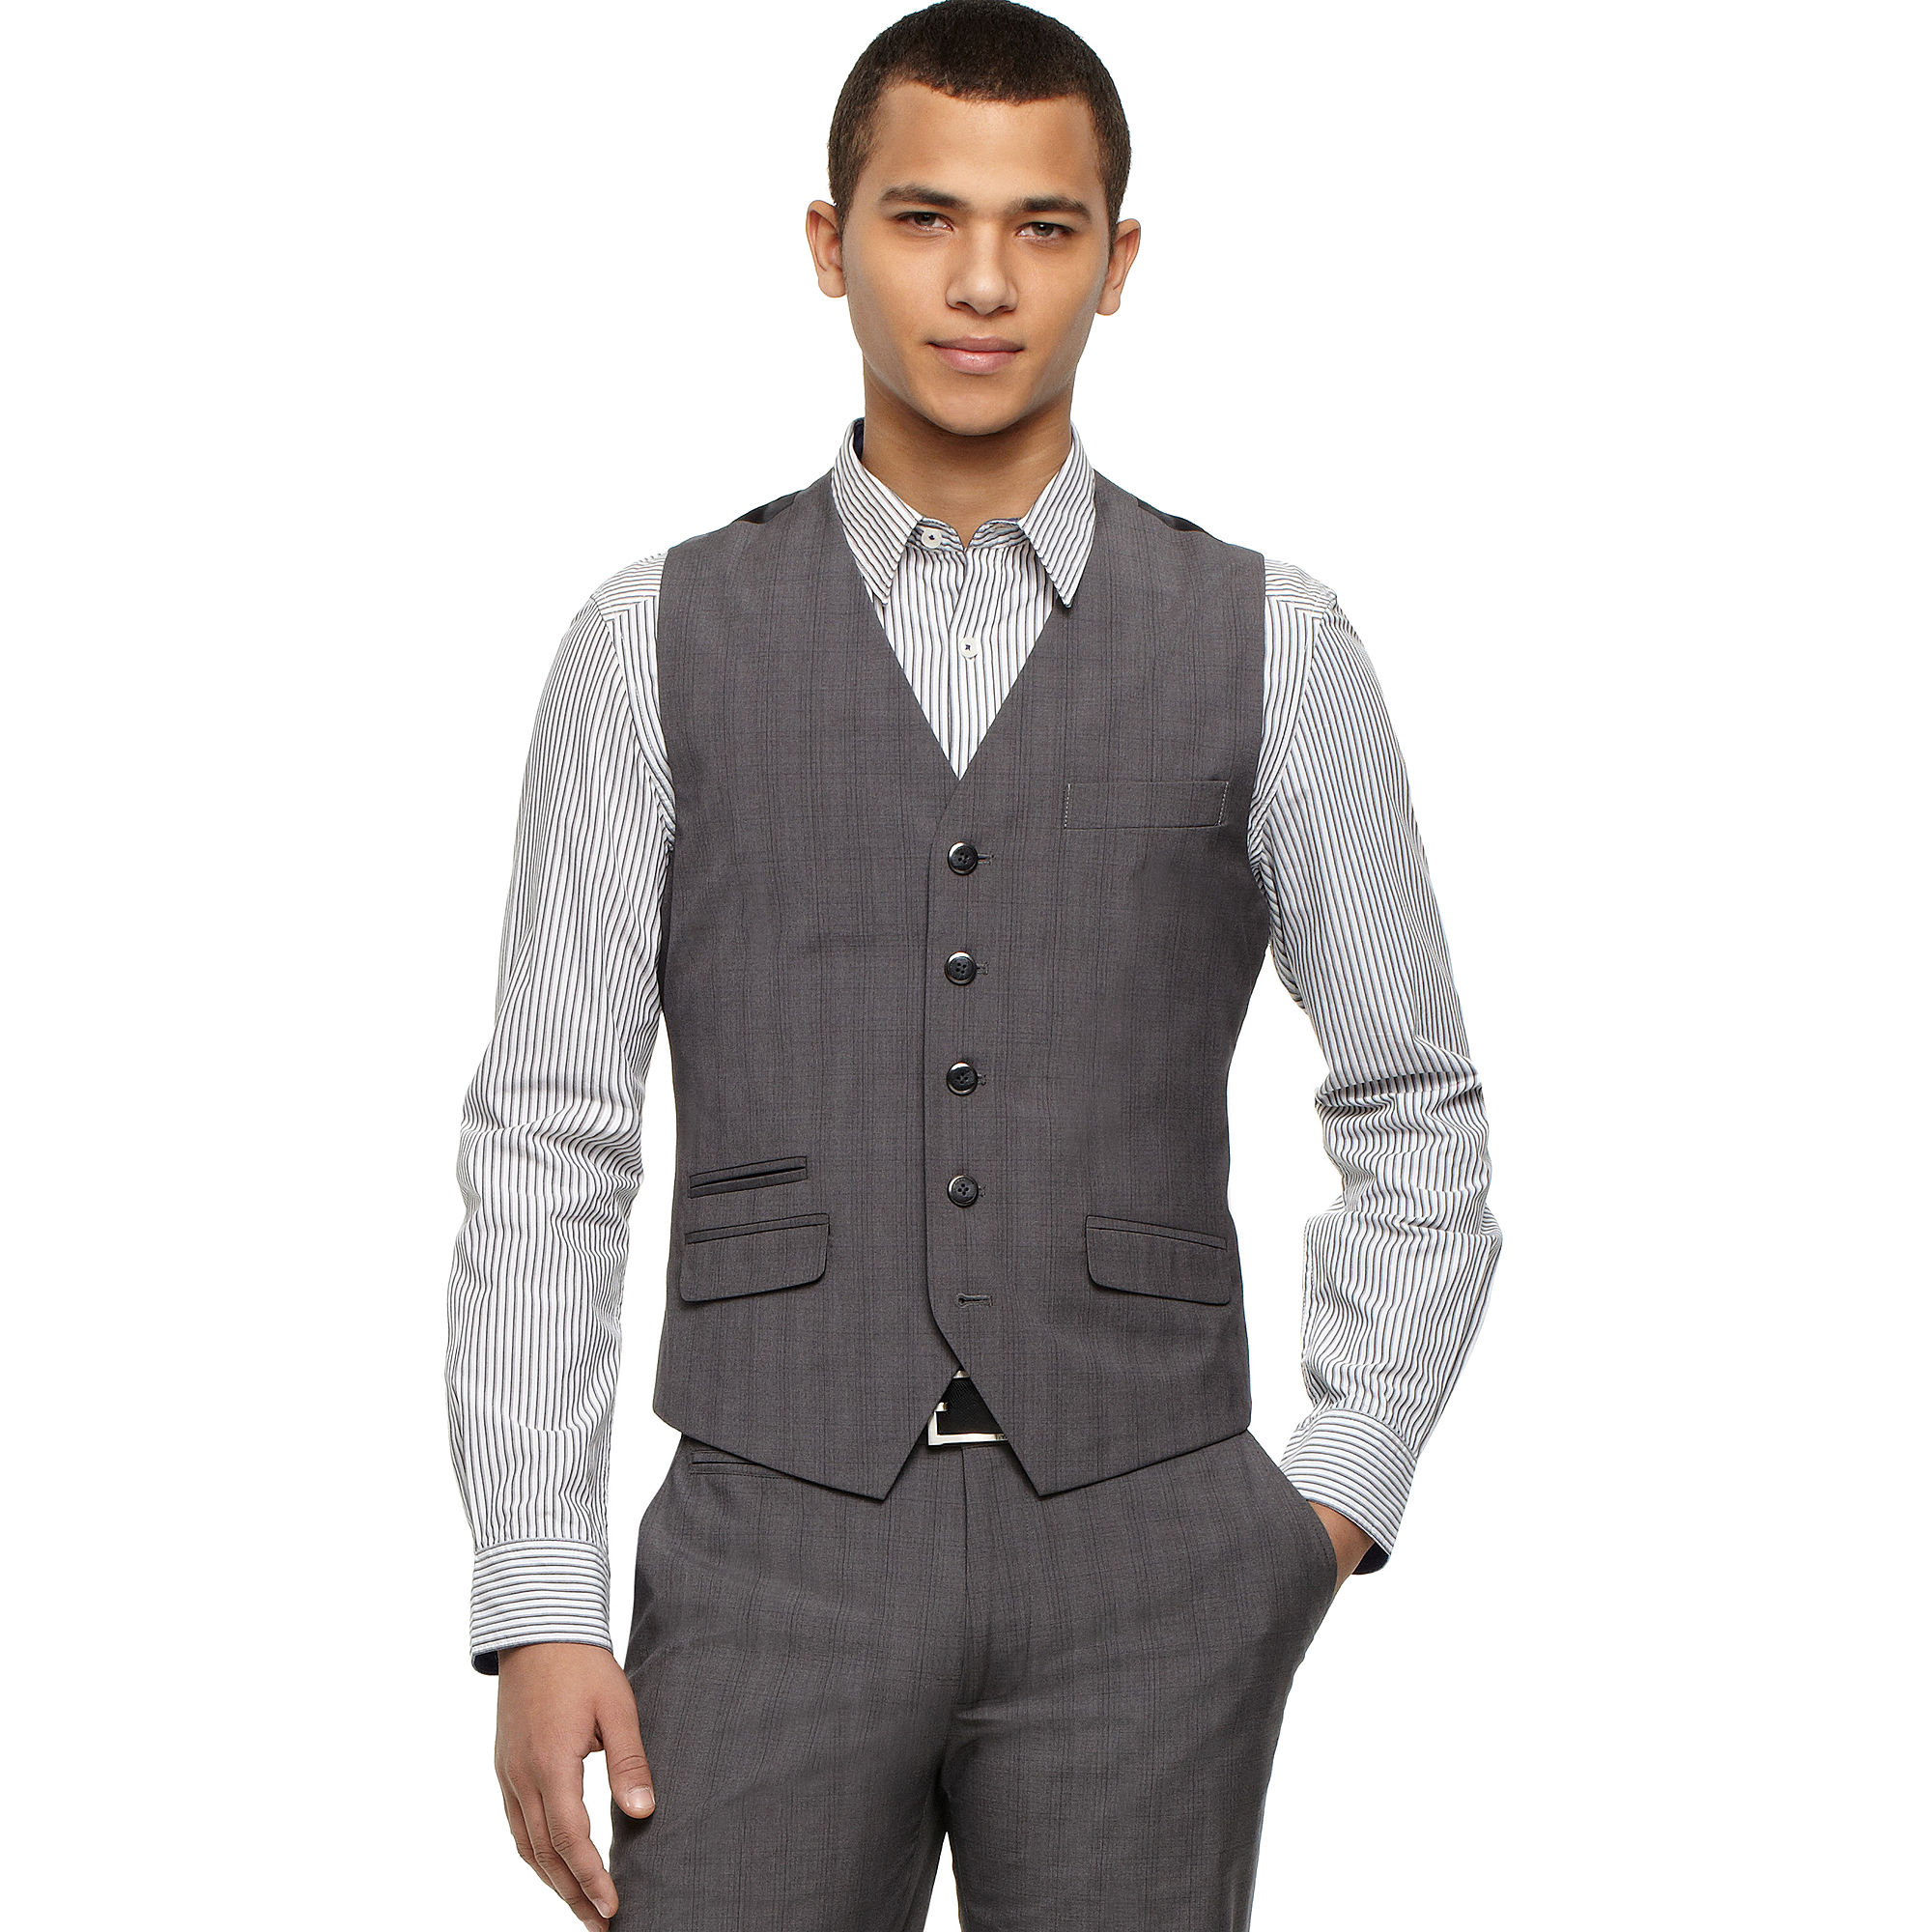 Lyst - Kenneth Cole Reaction Plaid Vest in Gray for Men